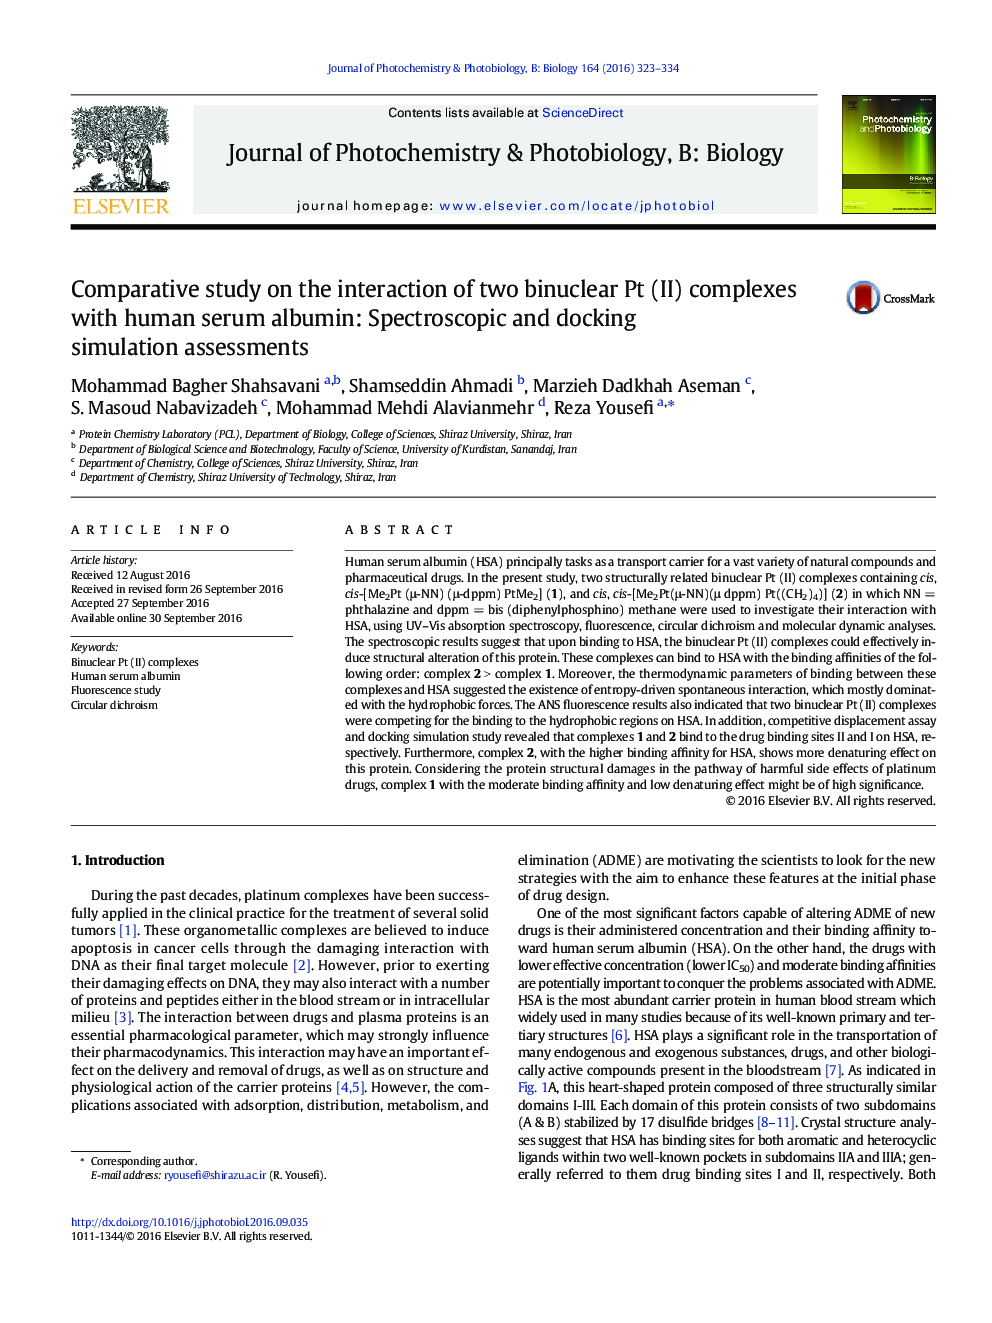 Comparative study on the interaction of two binuclear Pt (II) complexes with human serum albumin: Spectroscopic and docking simulation assessments